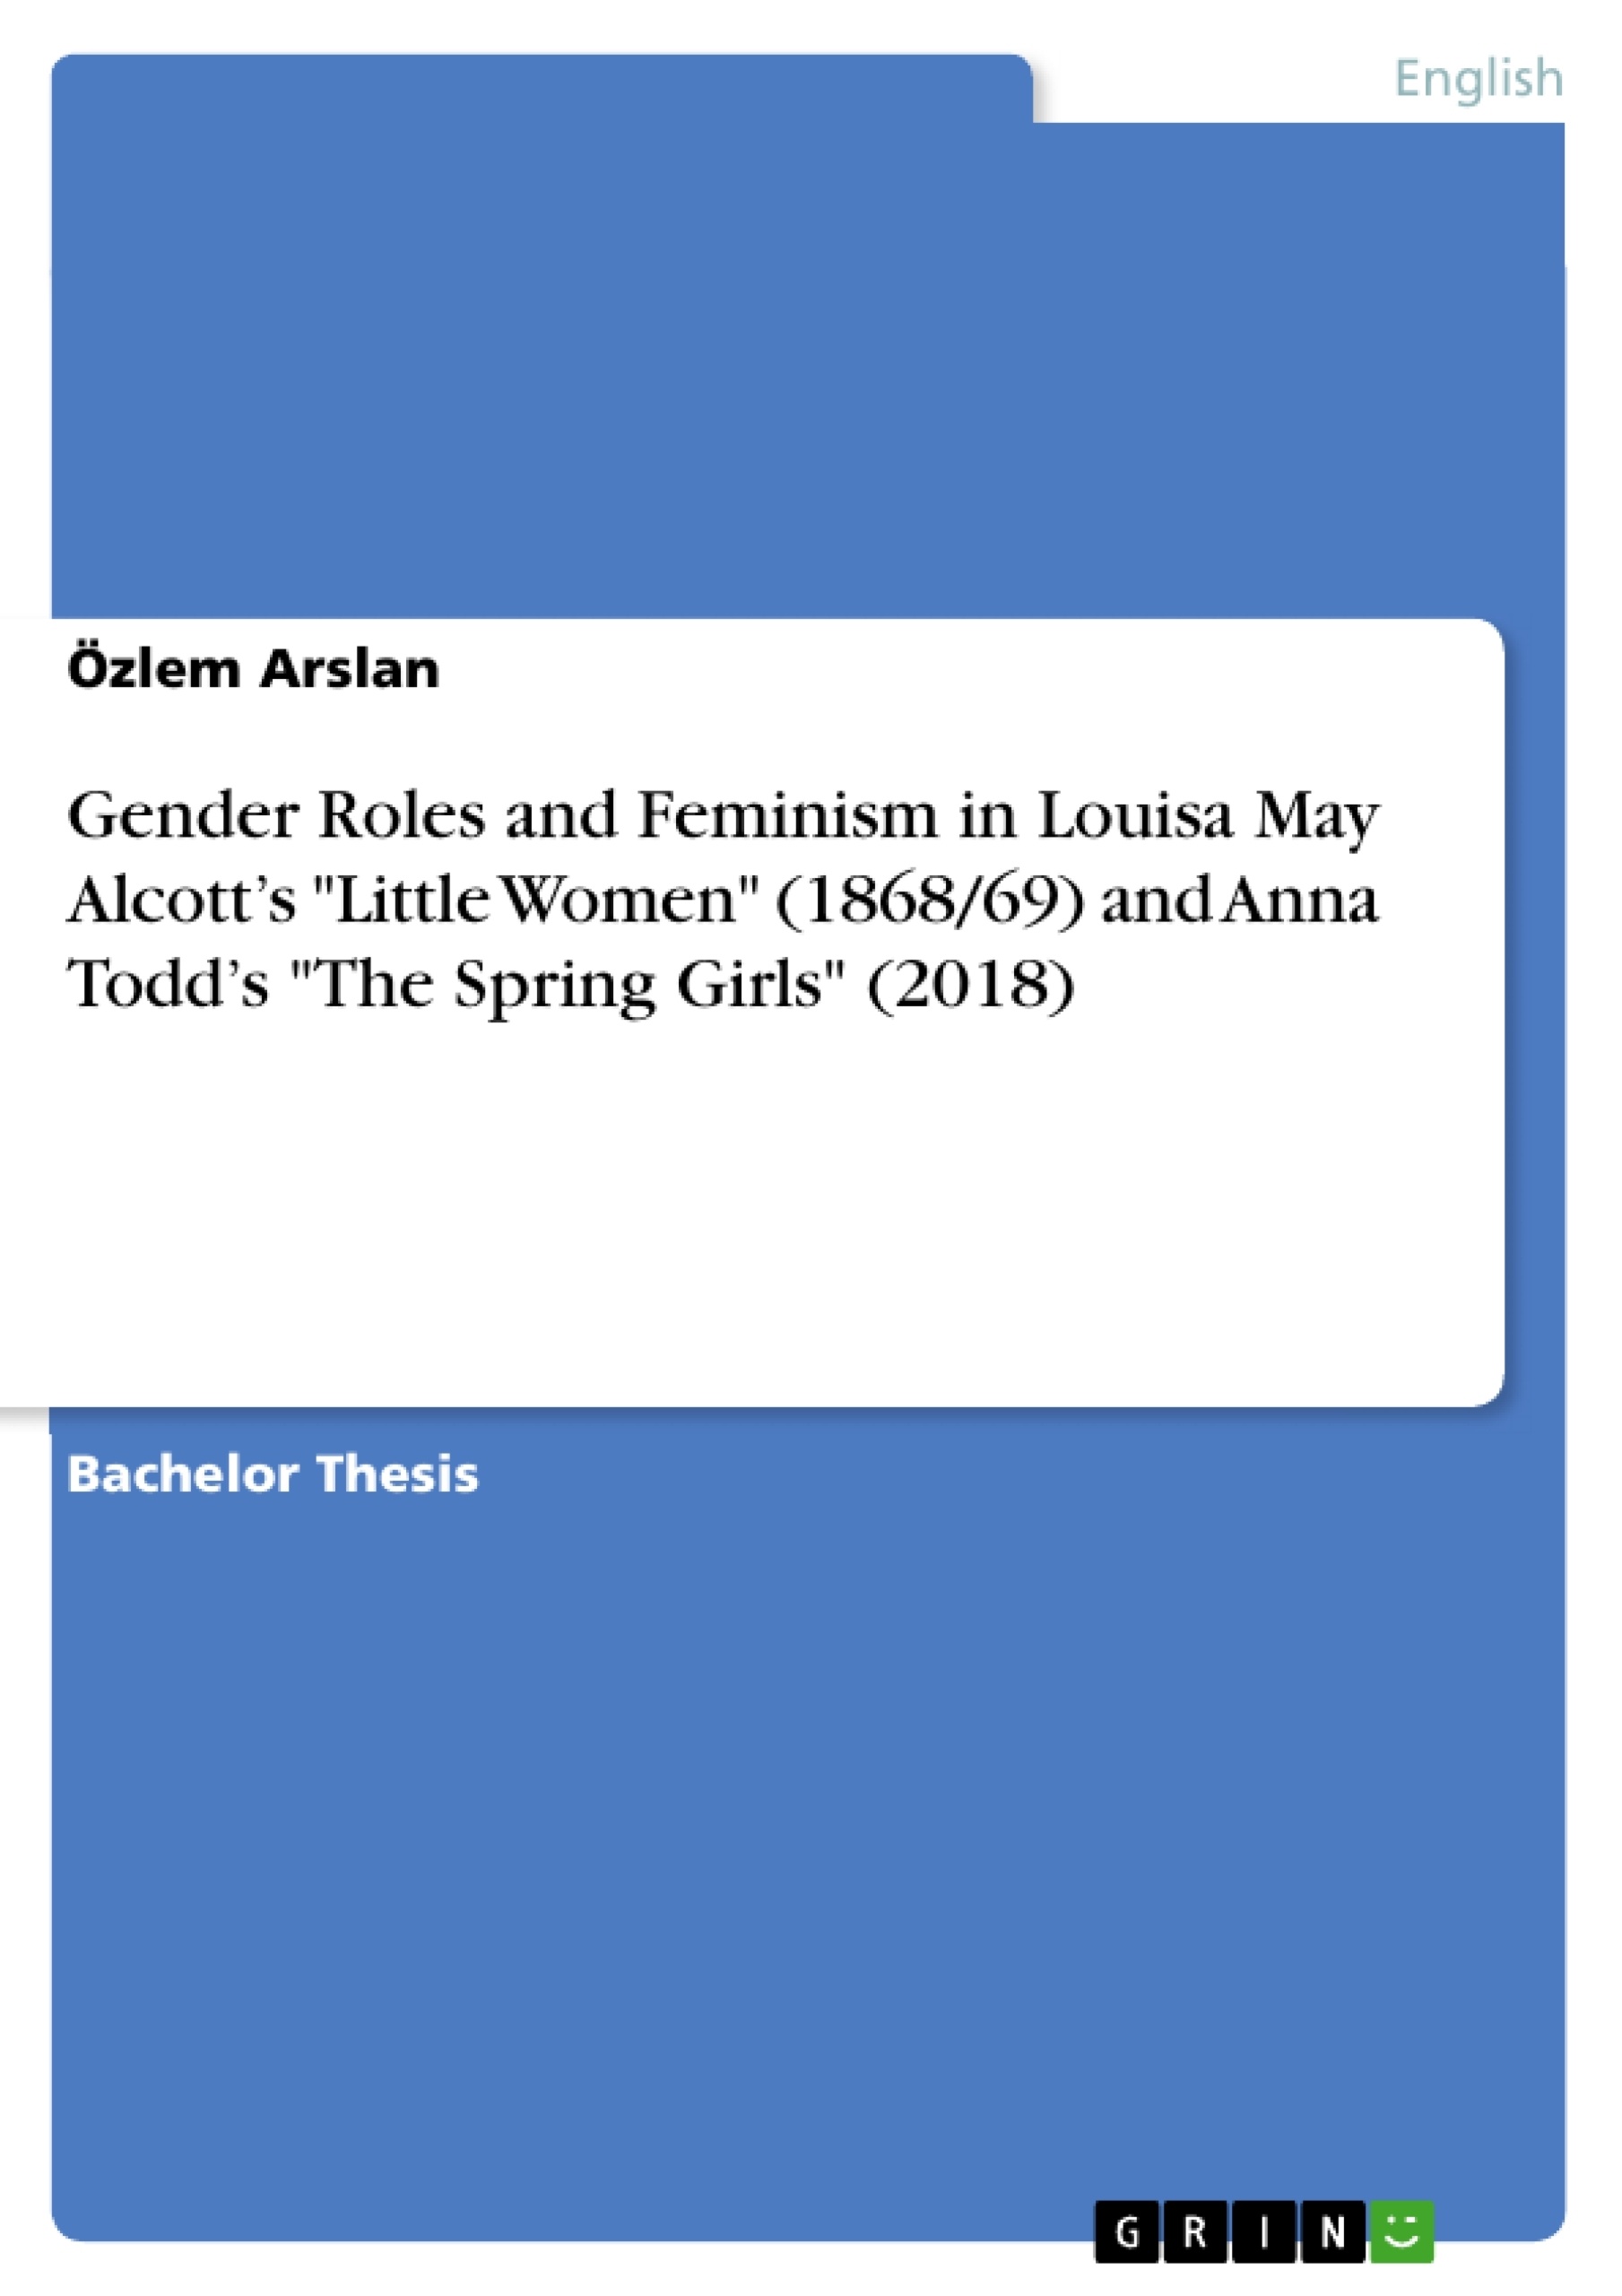 Titre: Gender Roles and Feminism in Louisa May Alcott’s "Little Women" (1868/69) and Anna Todd’s "The Spring Girls" (2018)